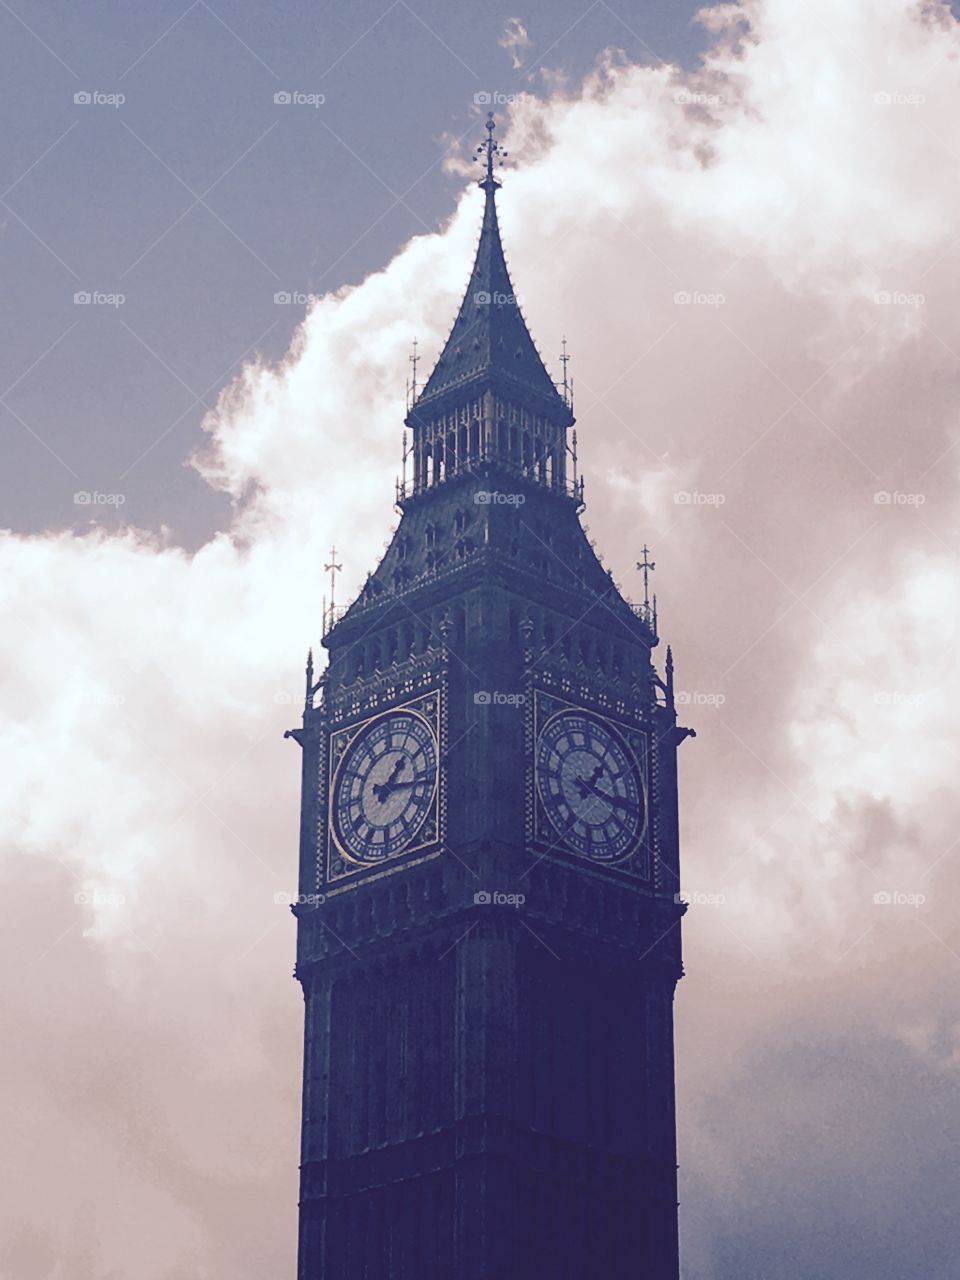 An edited picture of the top part of Big Ben clock tower in London 